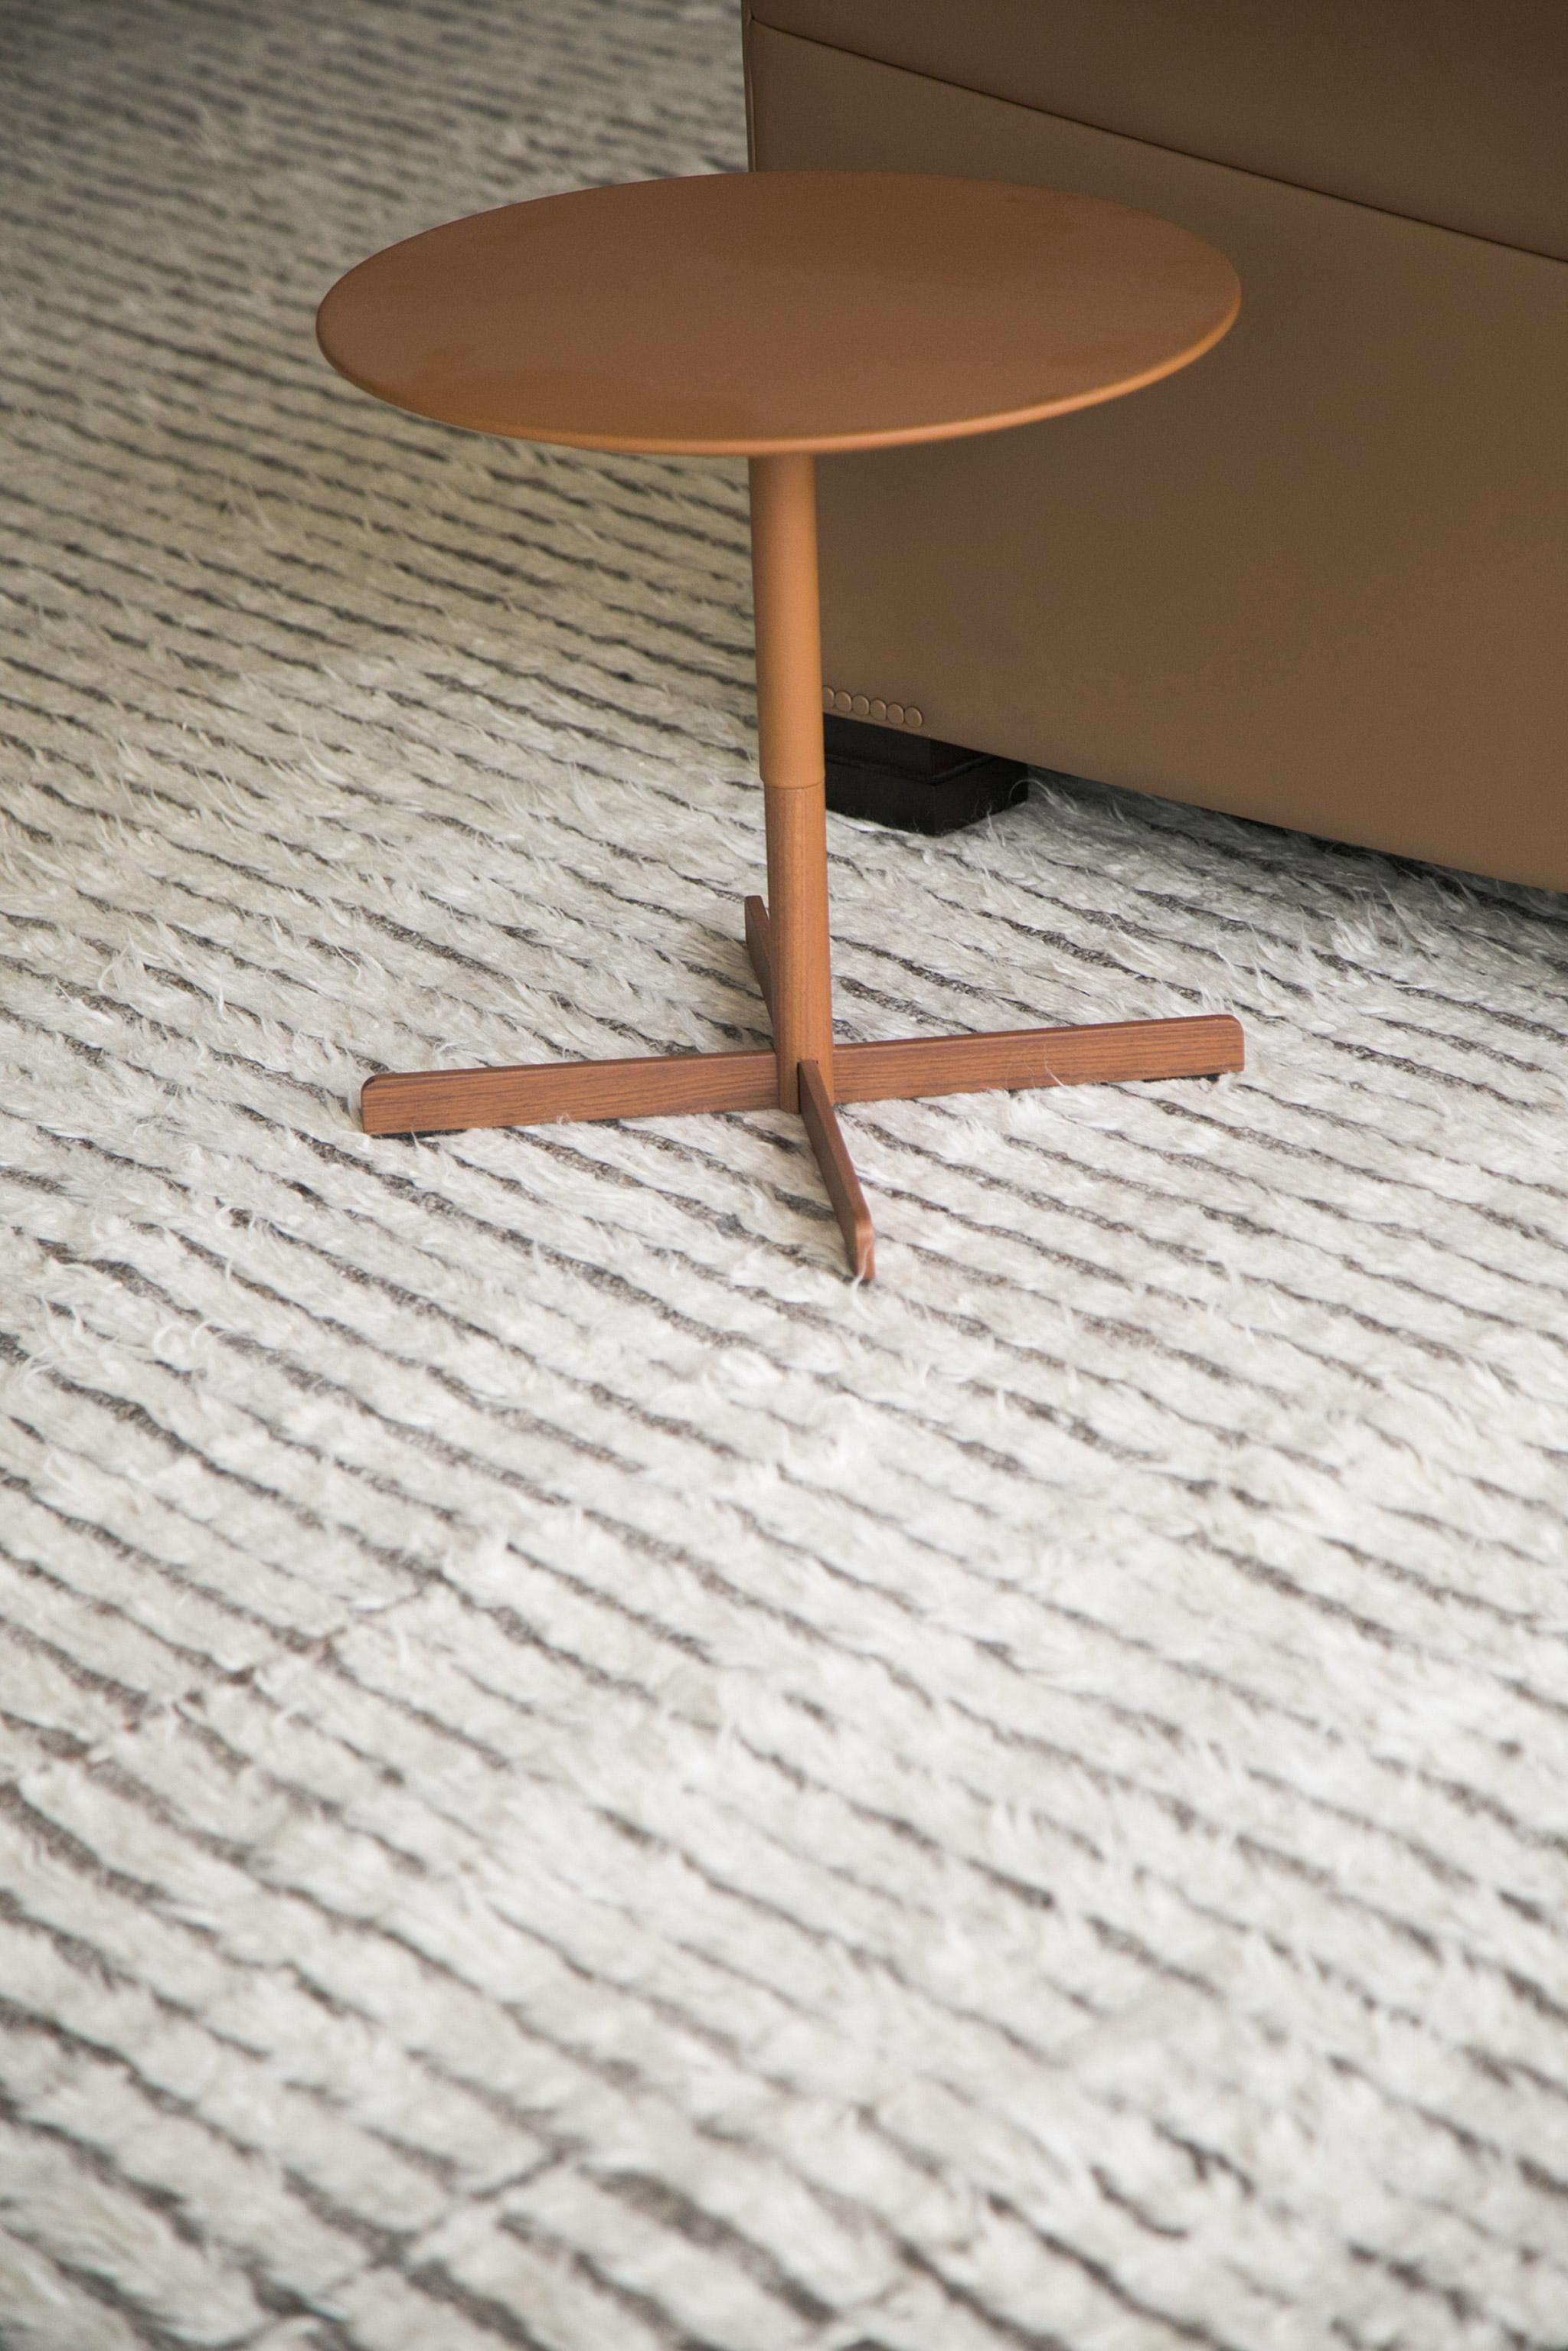 The signature collection of California. Handwoven luxurious wool rug, made of timeless design elements and neutral earth tones with a perfect shag in the shade of white. Mehraban's Haute Bohemian collection is designed in Los Angeles and named for